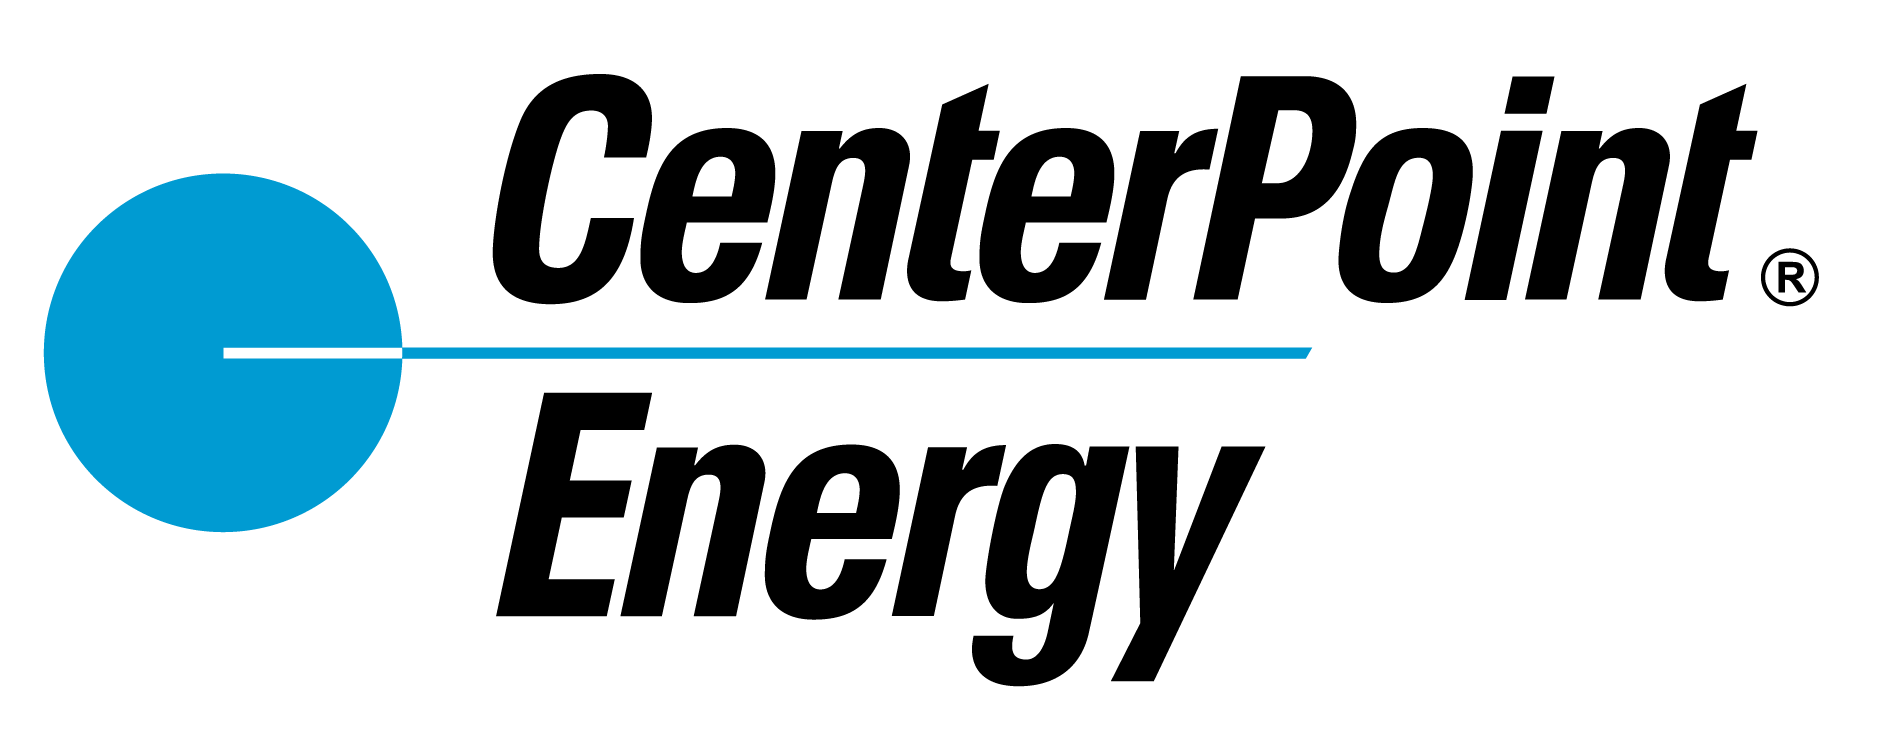 Welcome to the CenterPoint Energy Indiana Marketplace!